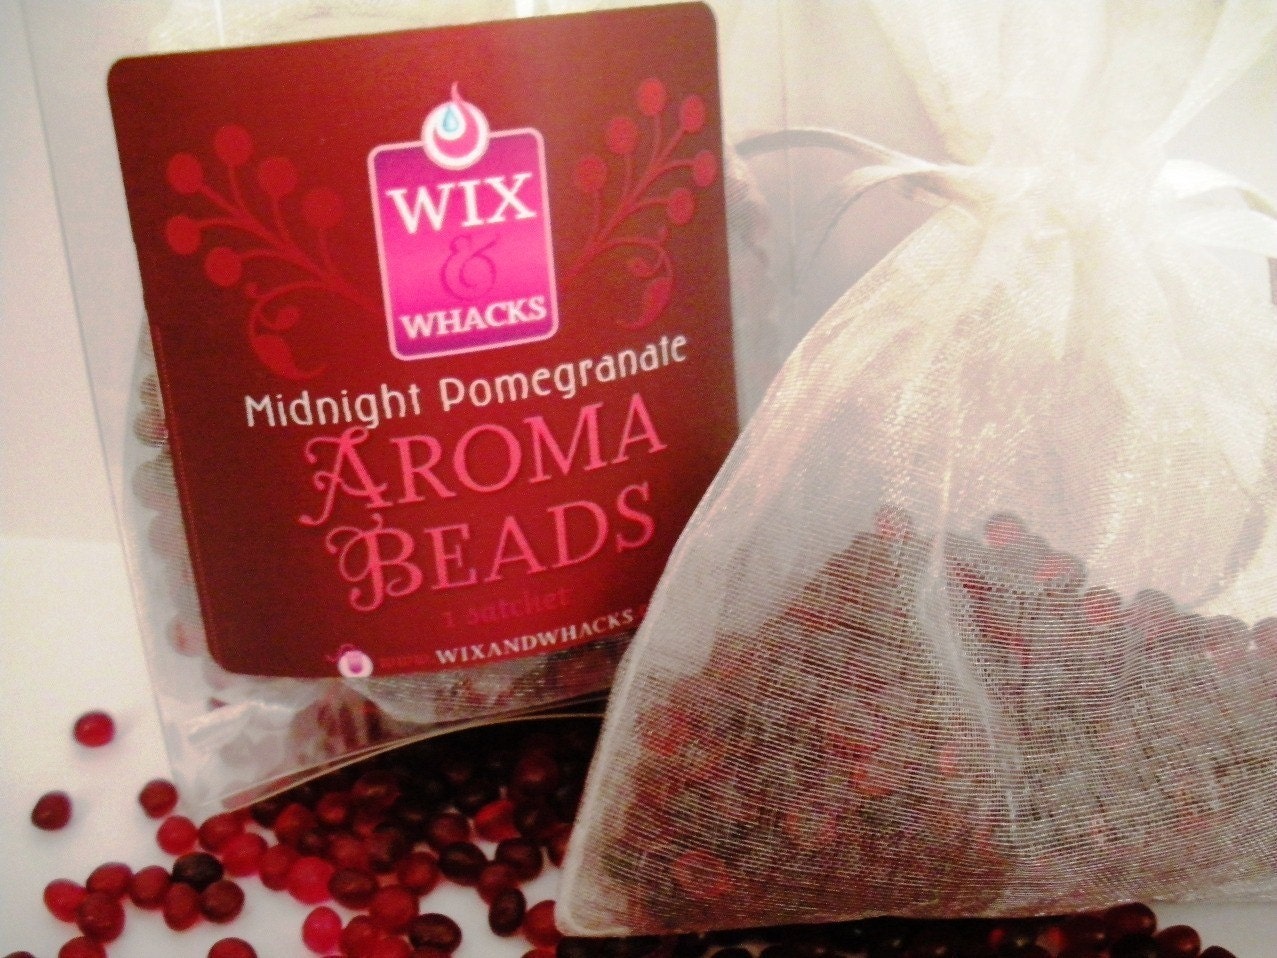 MIDNIGHT POMEGRANATE - Aroma Bead Sachet - Highly Scented - Buy 4 get 1 FREE